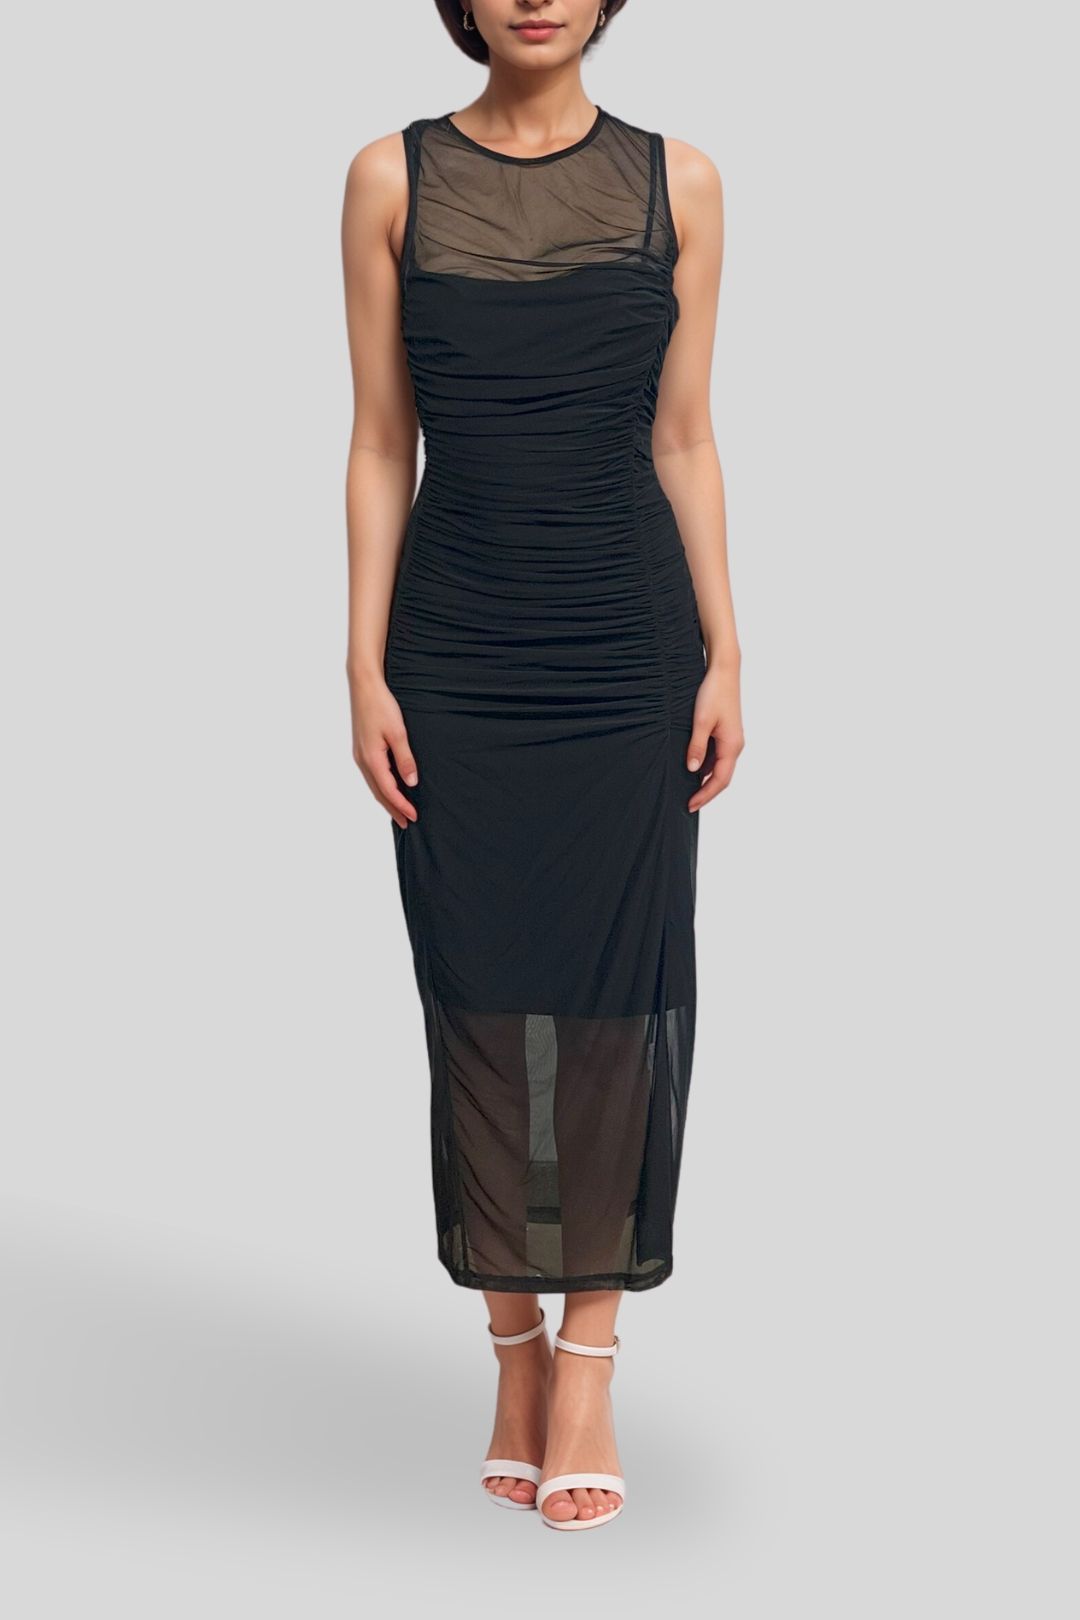 Dress hire cocktail evening Cue - Ruched Black Sheer Panel Dress